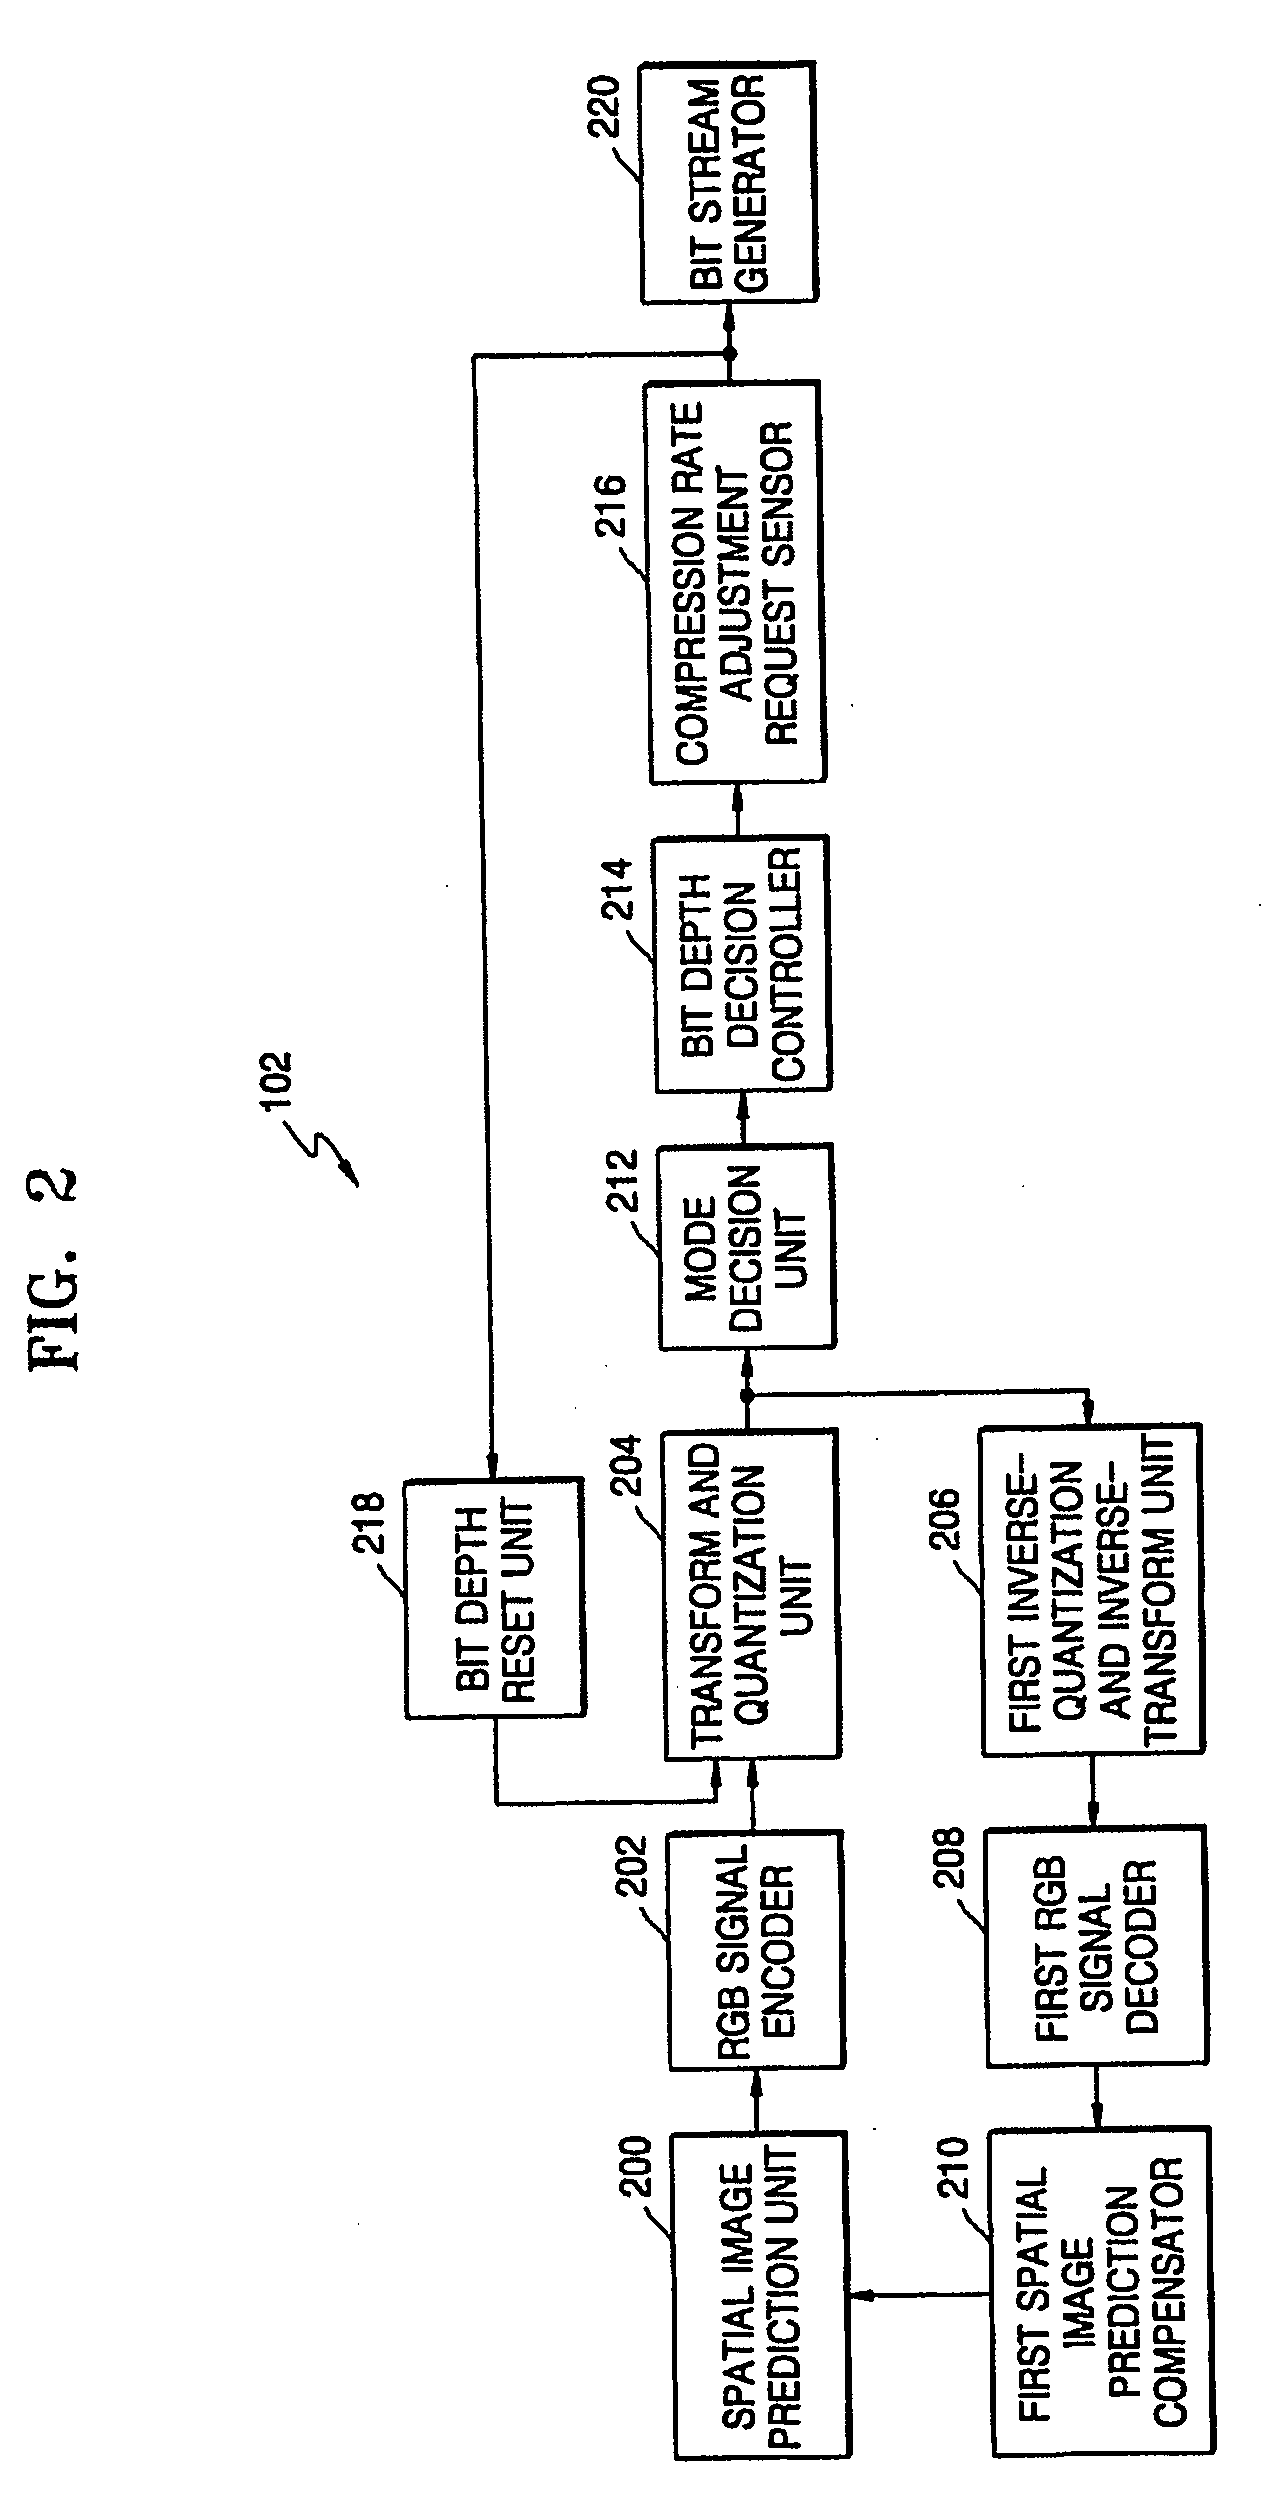 Apparatus and method for performing dynamic capacitance compensation (DCC) in liquid crystal display (LCD)